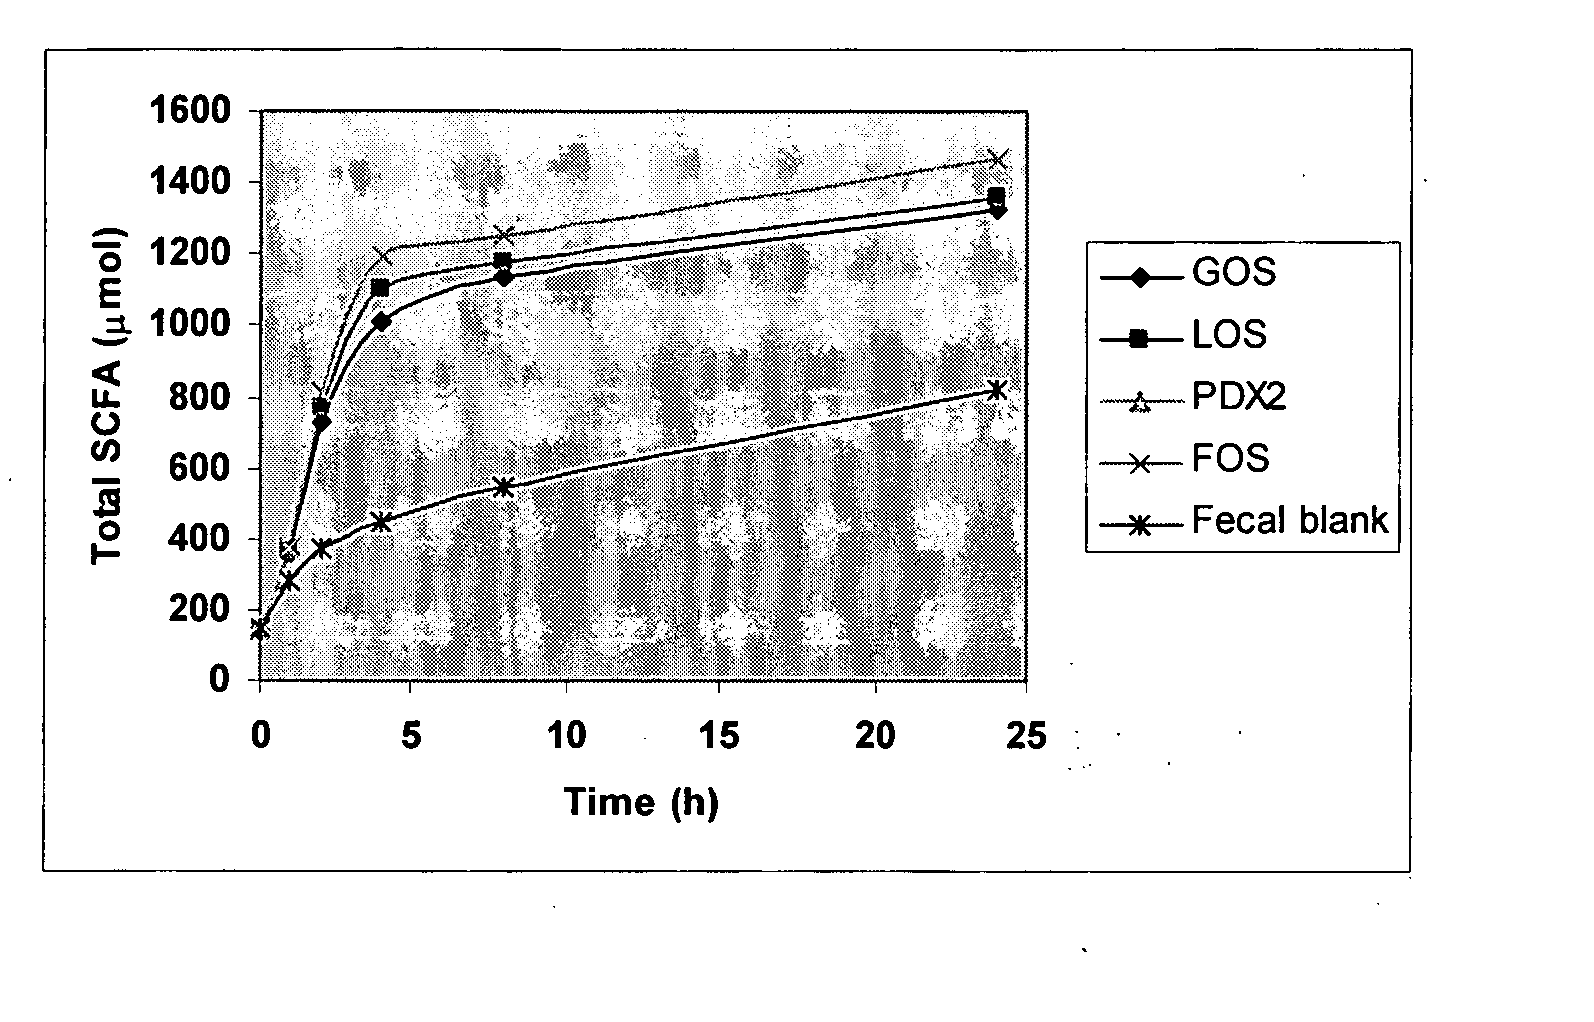 Method for simulating the functional attributes of human milk oligosaccharides in formula-fed infants